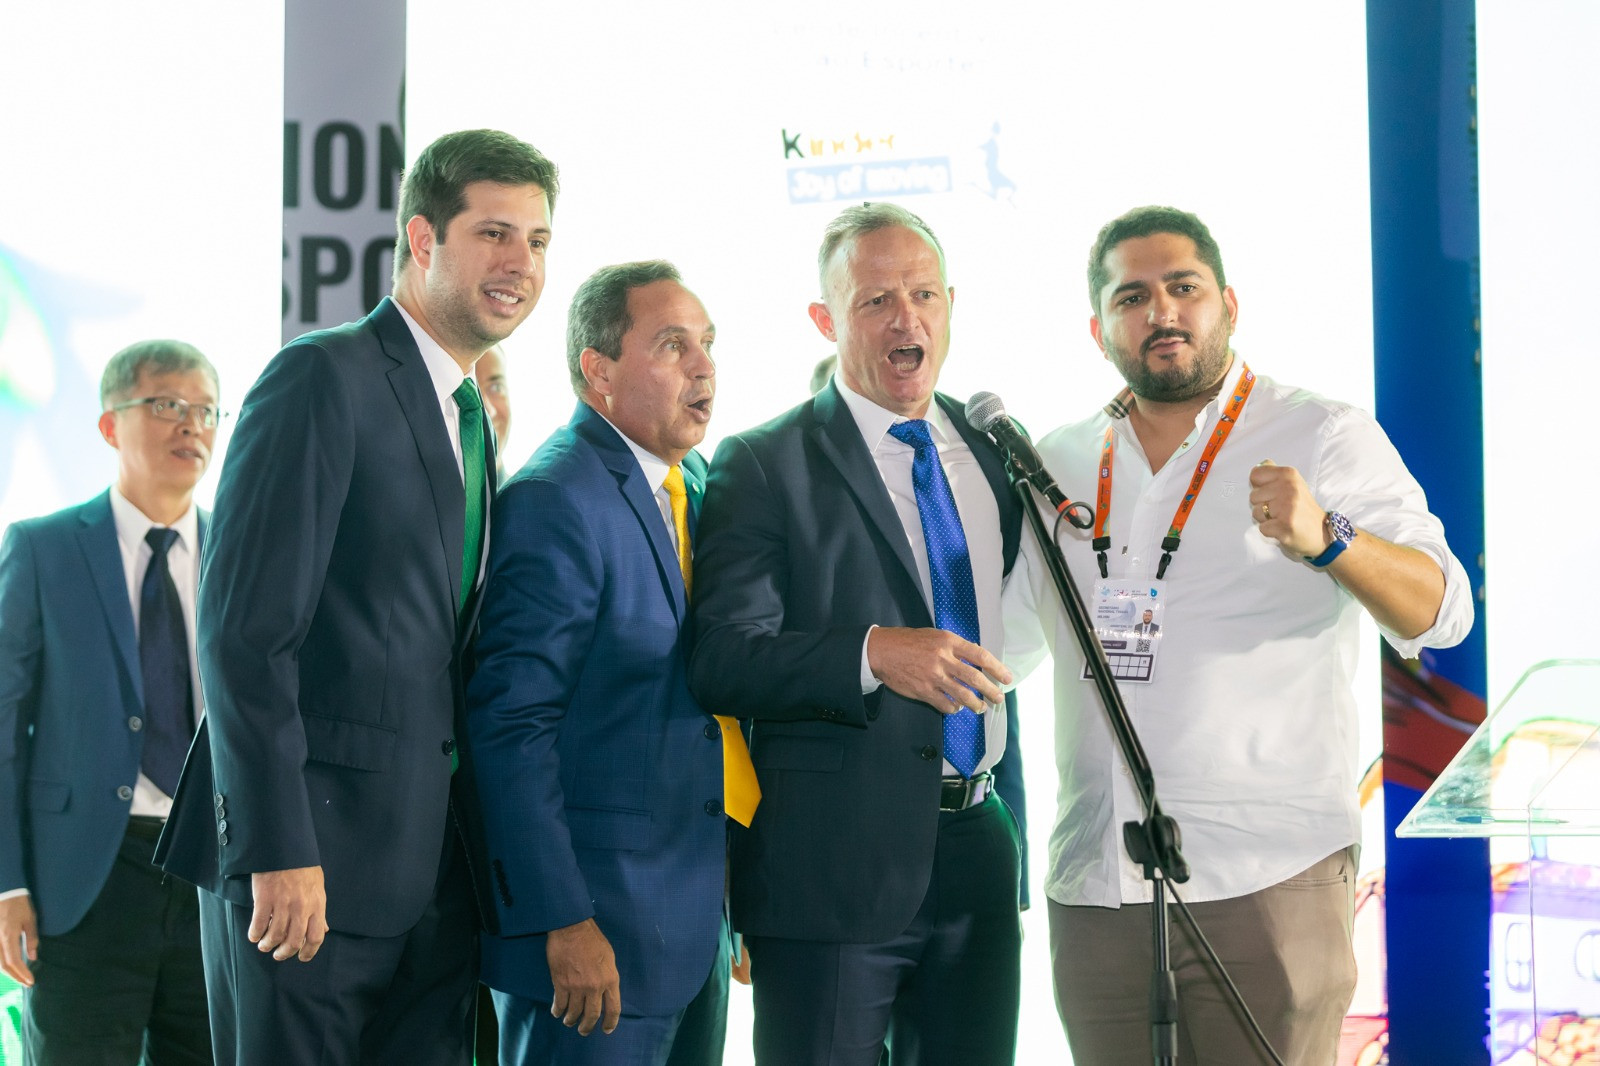 ISF President Laurent Petrynka, second from right, declared the U15 Gymnasiade 2023 open ©ISF